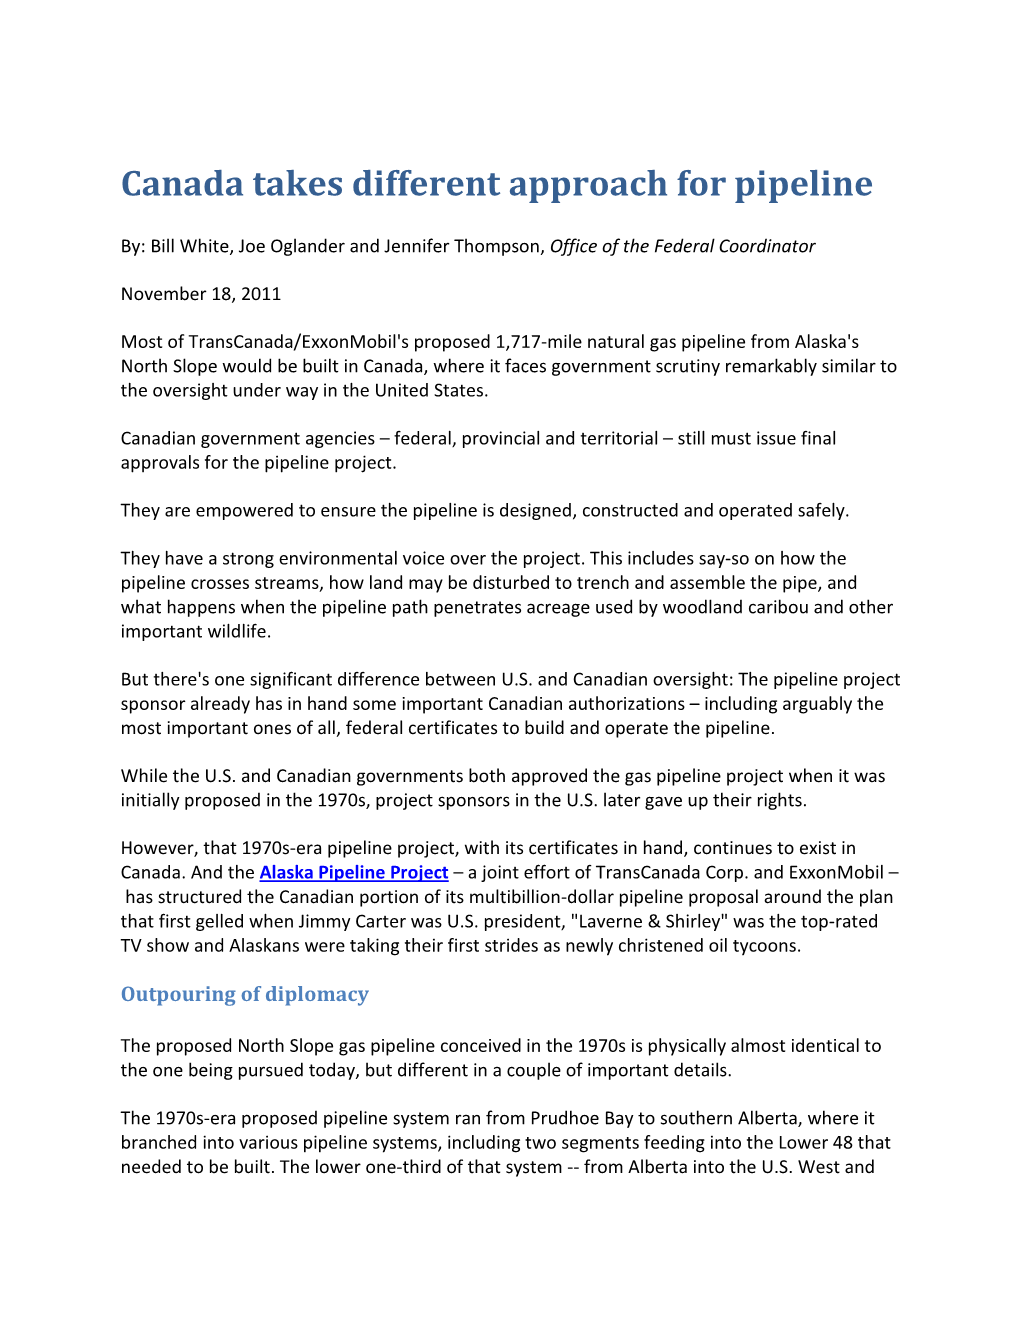 Canada Takes Different Approach for Pipeline